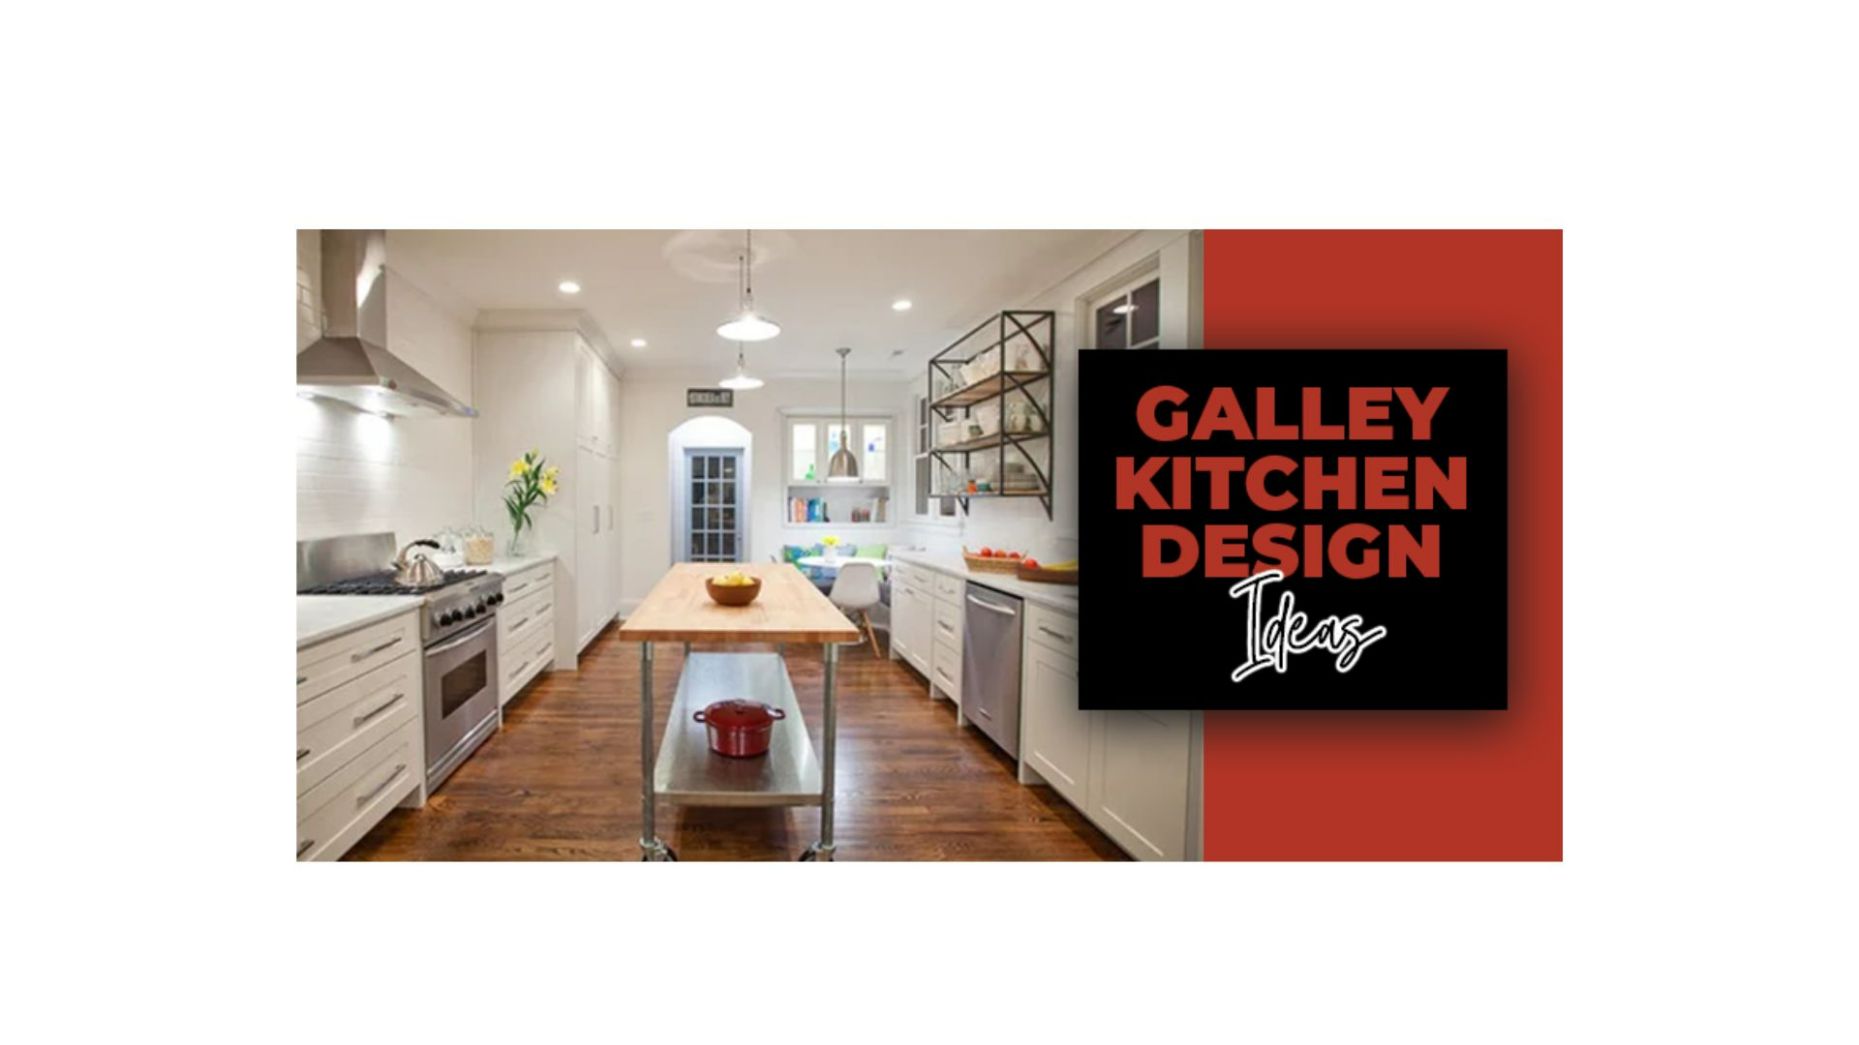 How the Galley Workstation Improves Kitchens